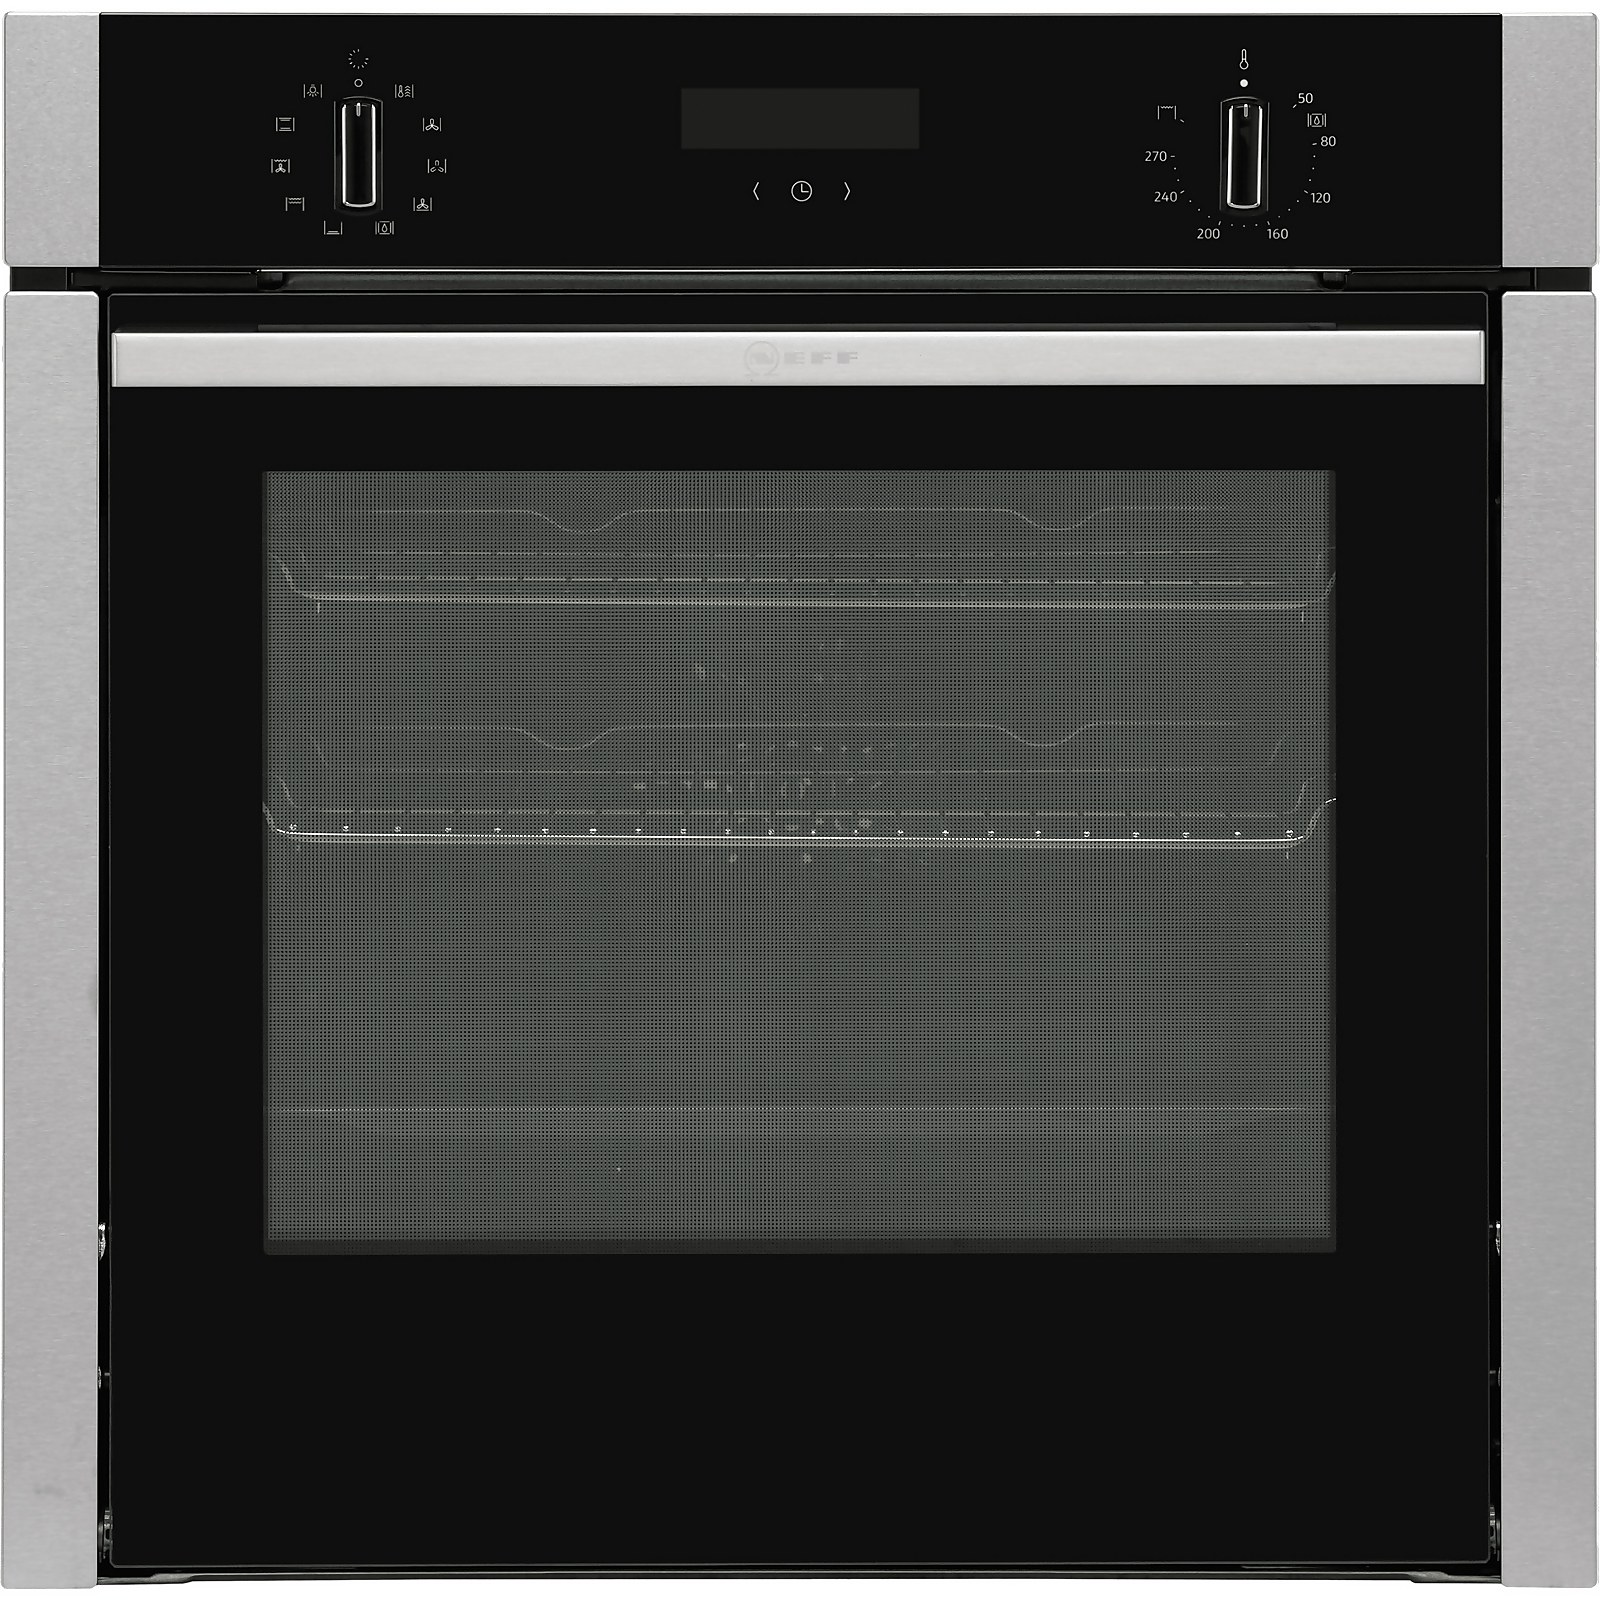 Photo of Neff N50 Slide&hide® B3ace4hn0b Built In Electric Single Oven - Stainless Steel